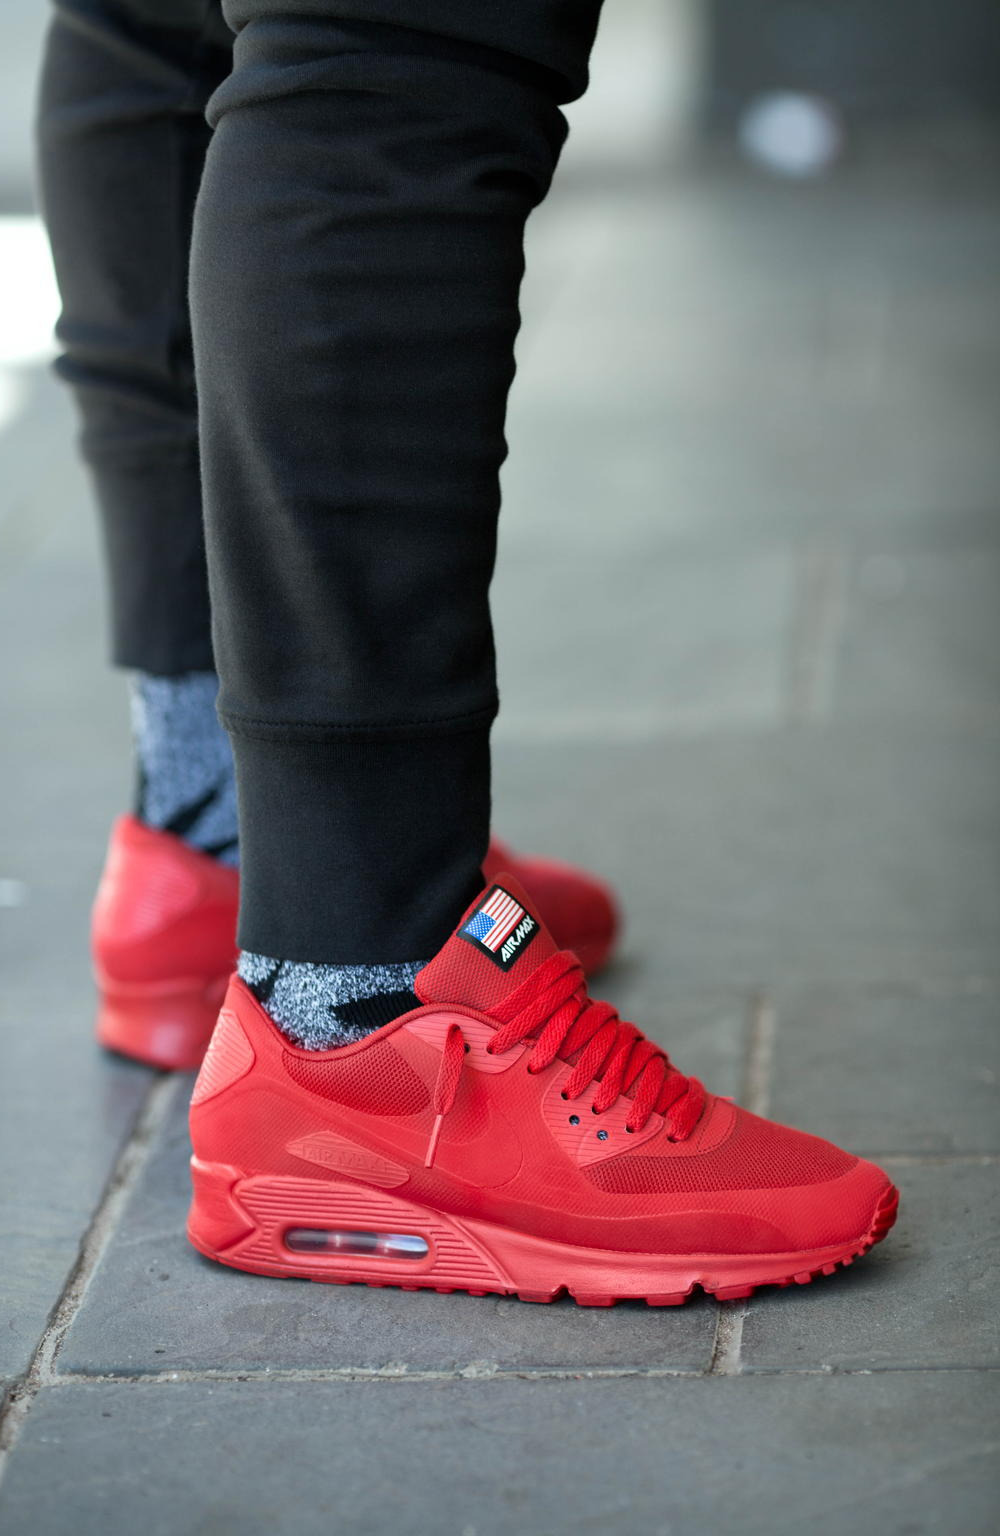 nike air max hyperfuse red